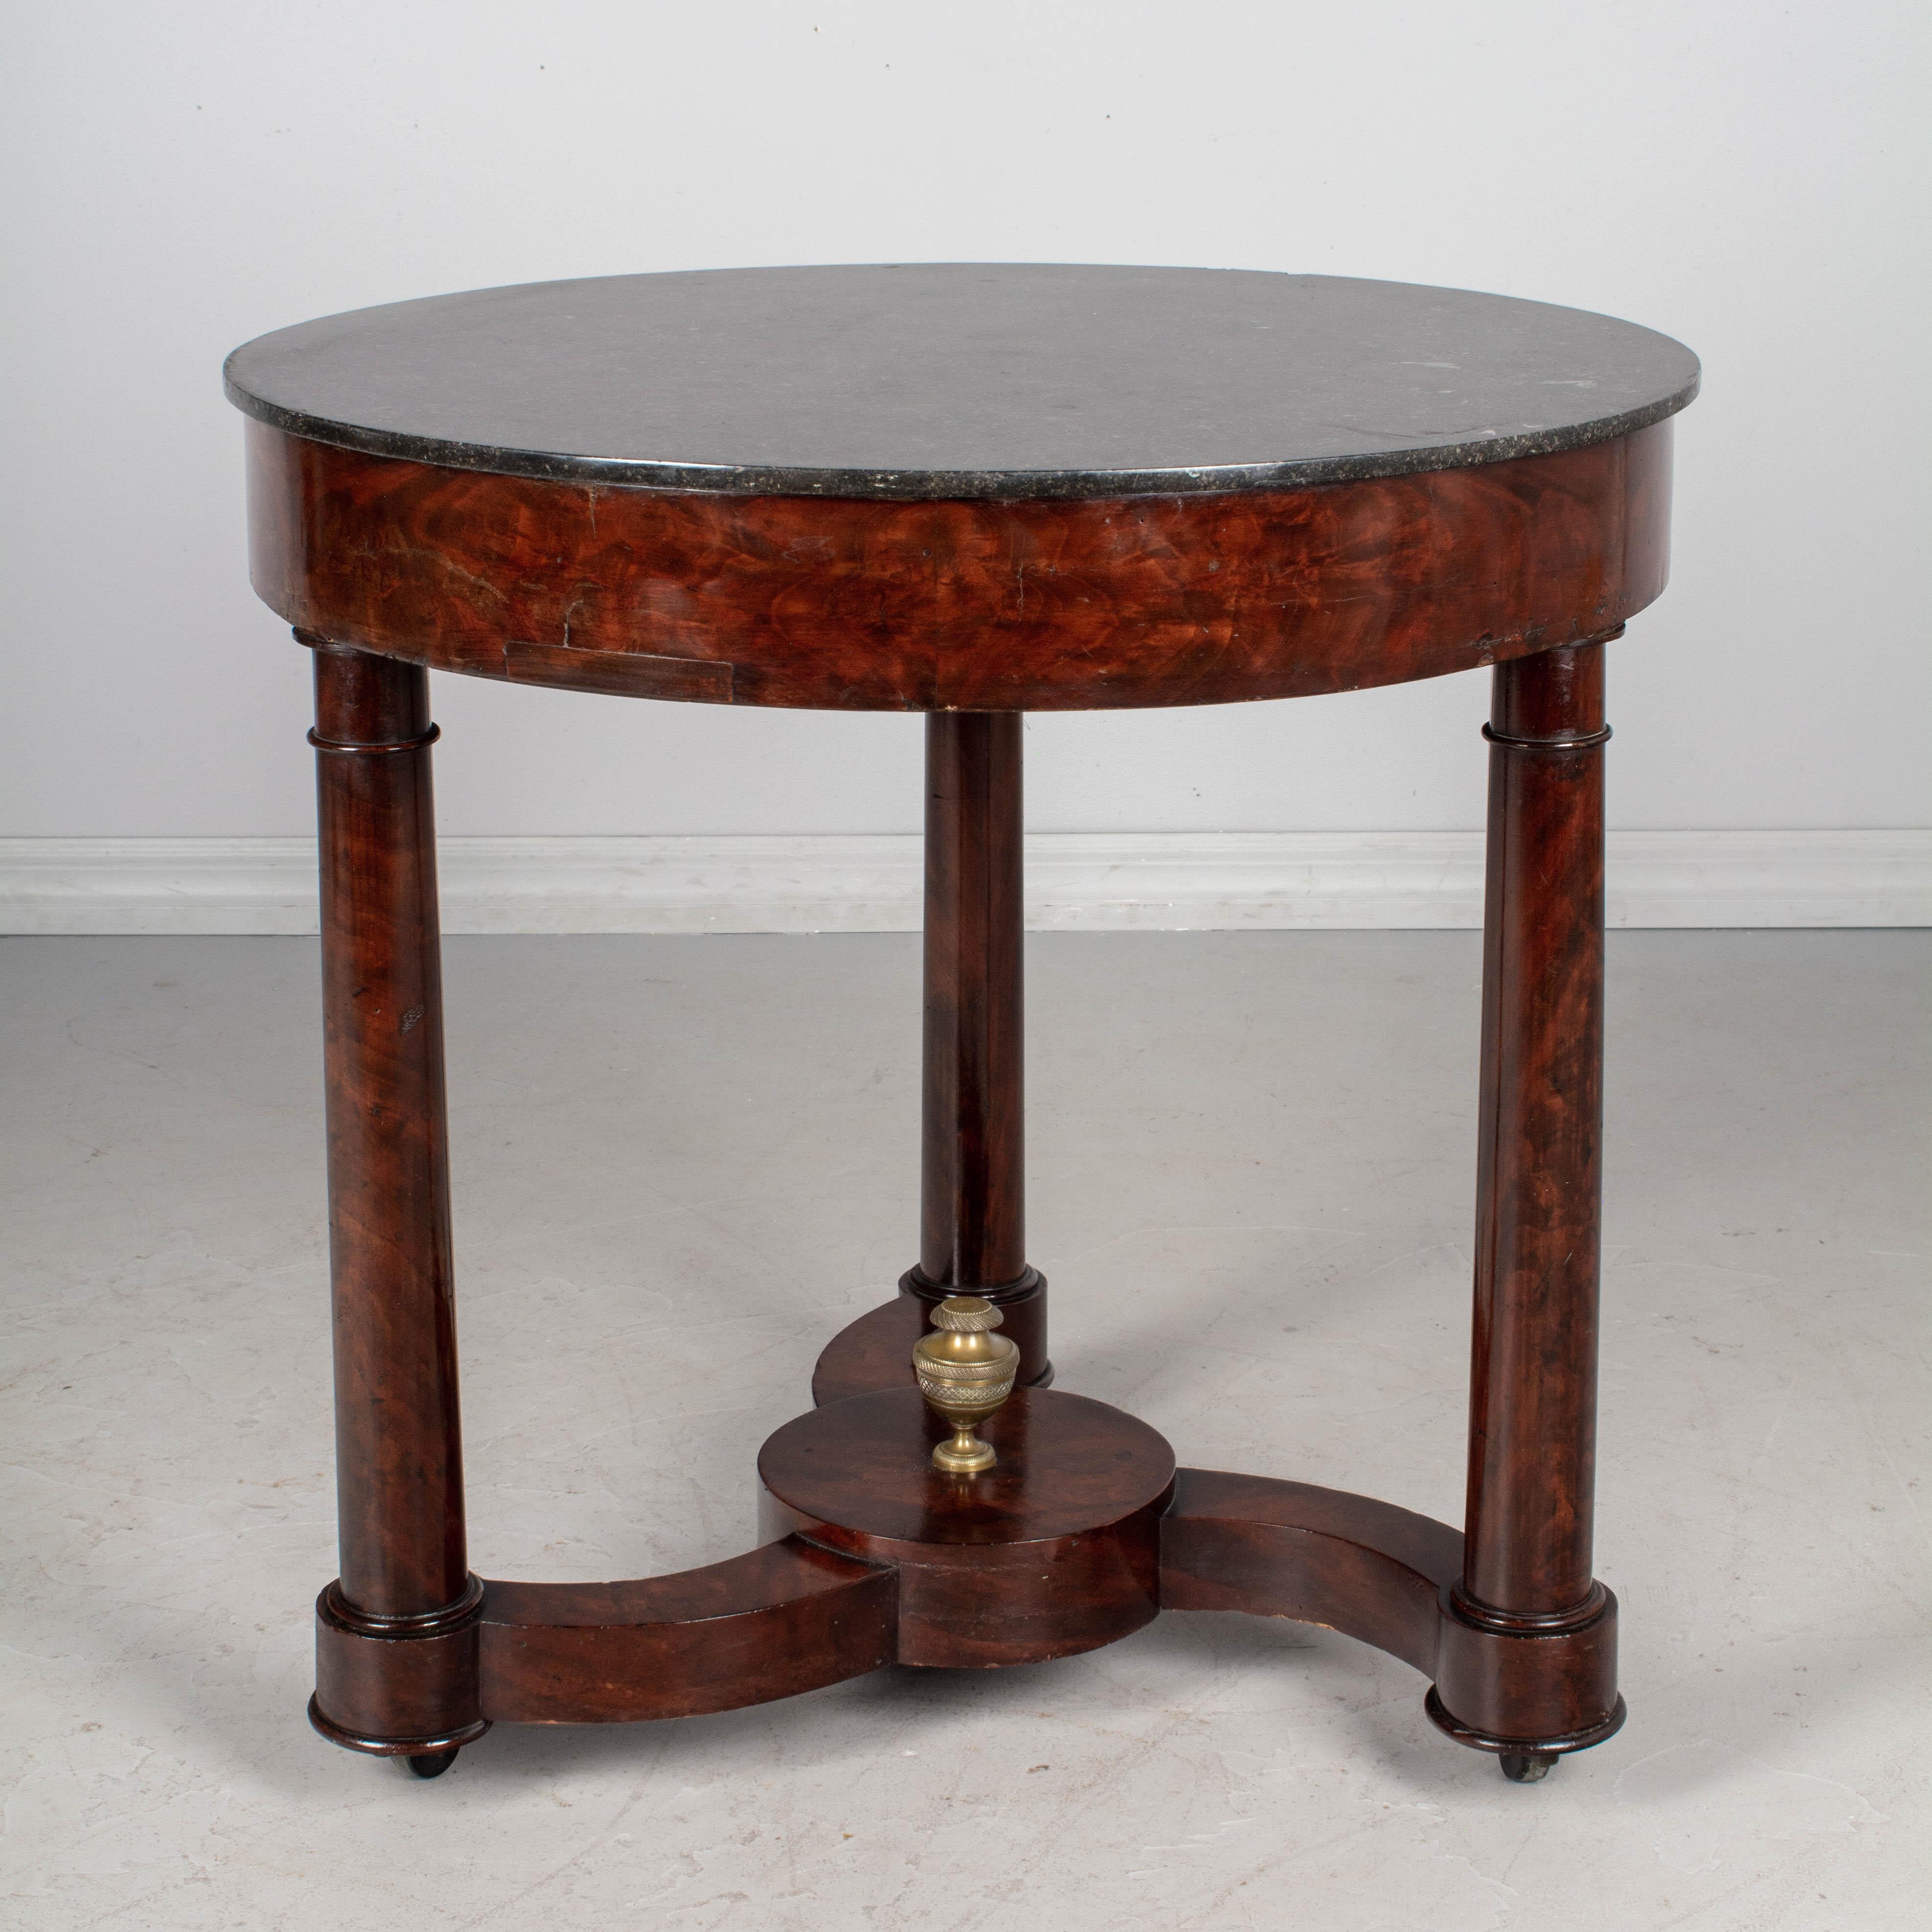 19th Century French Mahogany Gueridon or Game Table In Good Condition For Sale In Winter Park, FL